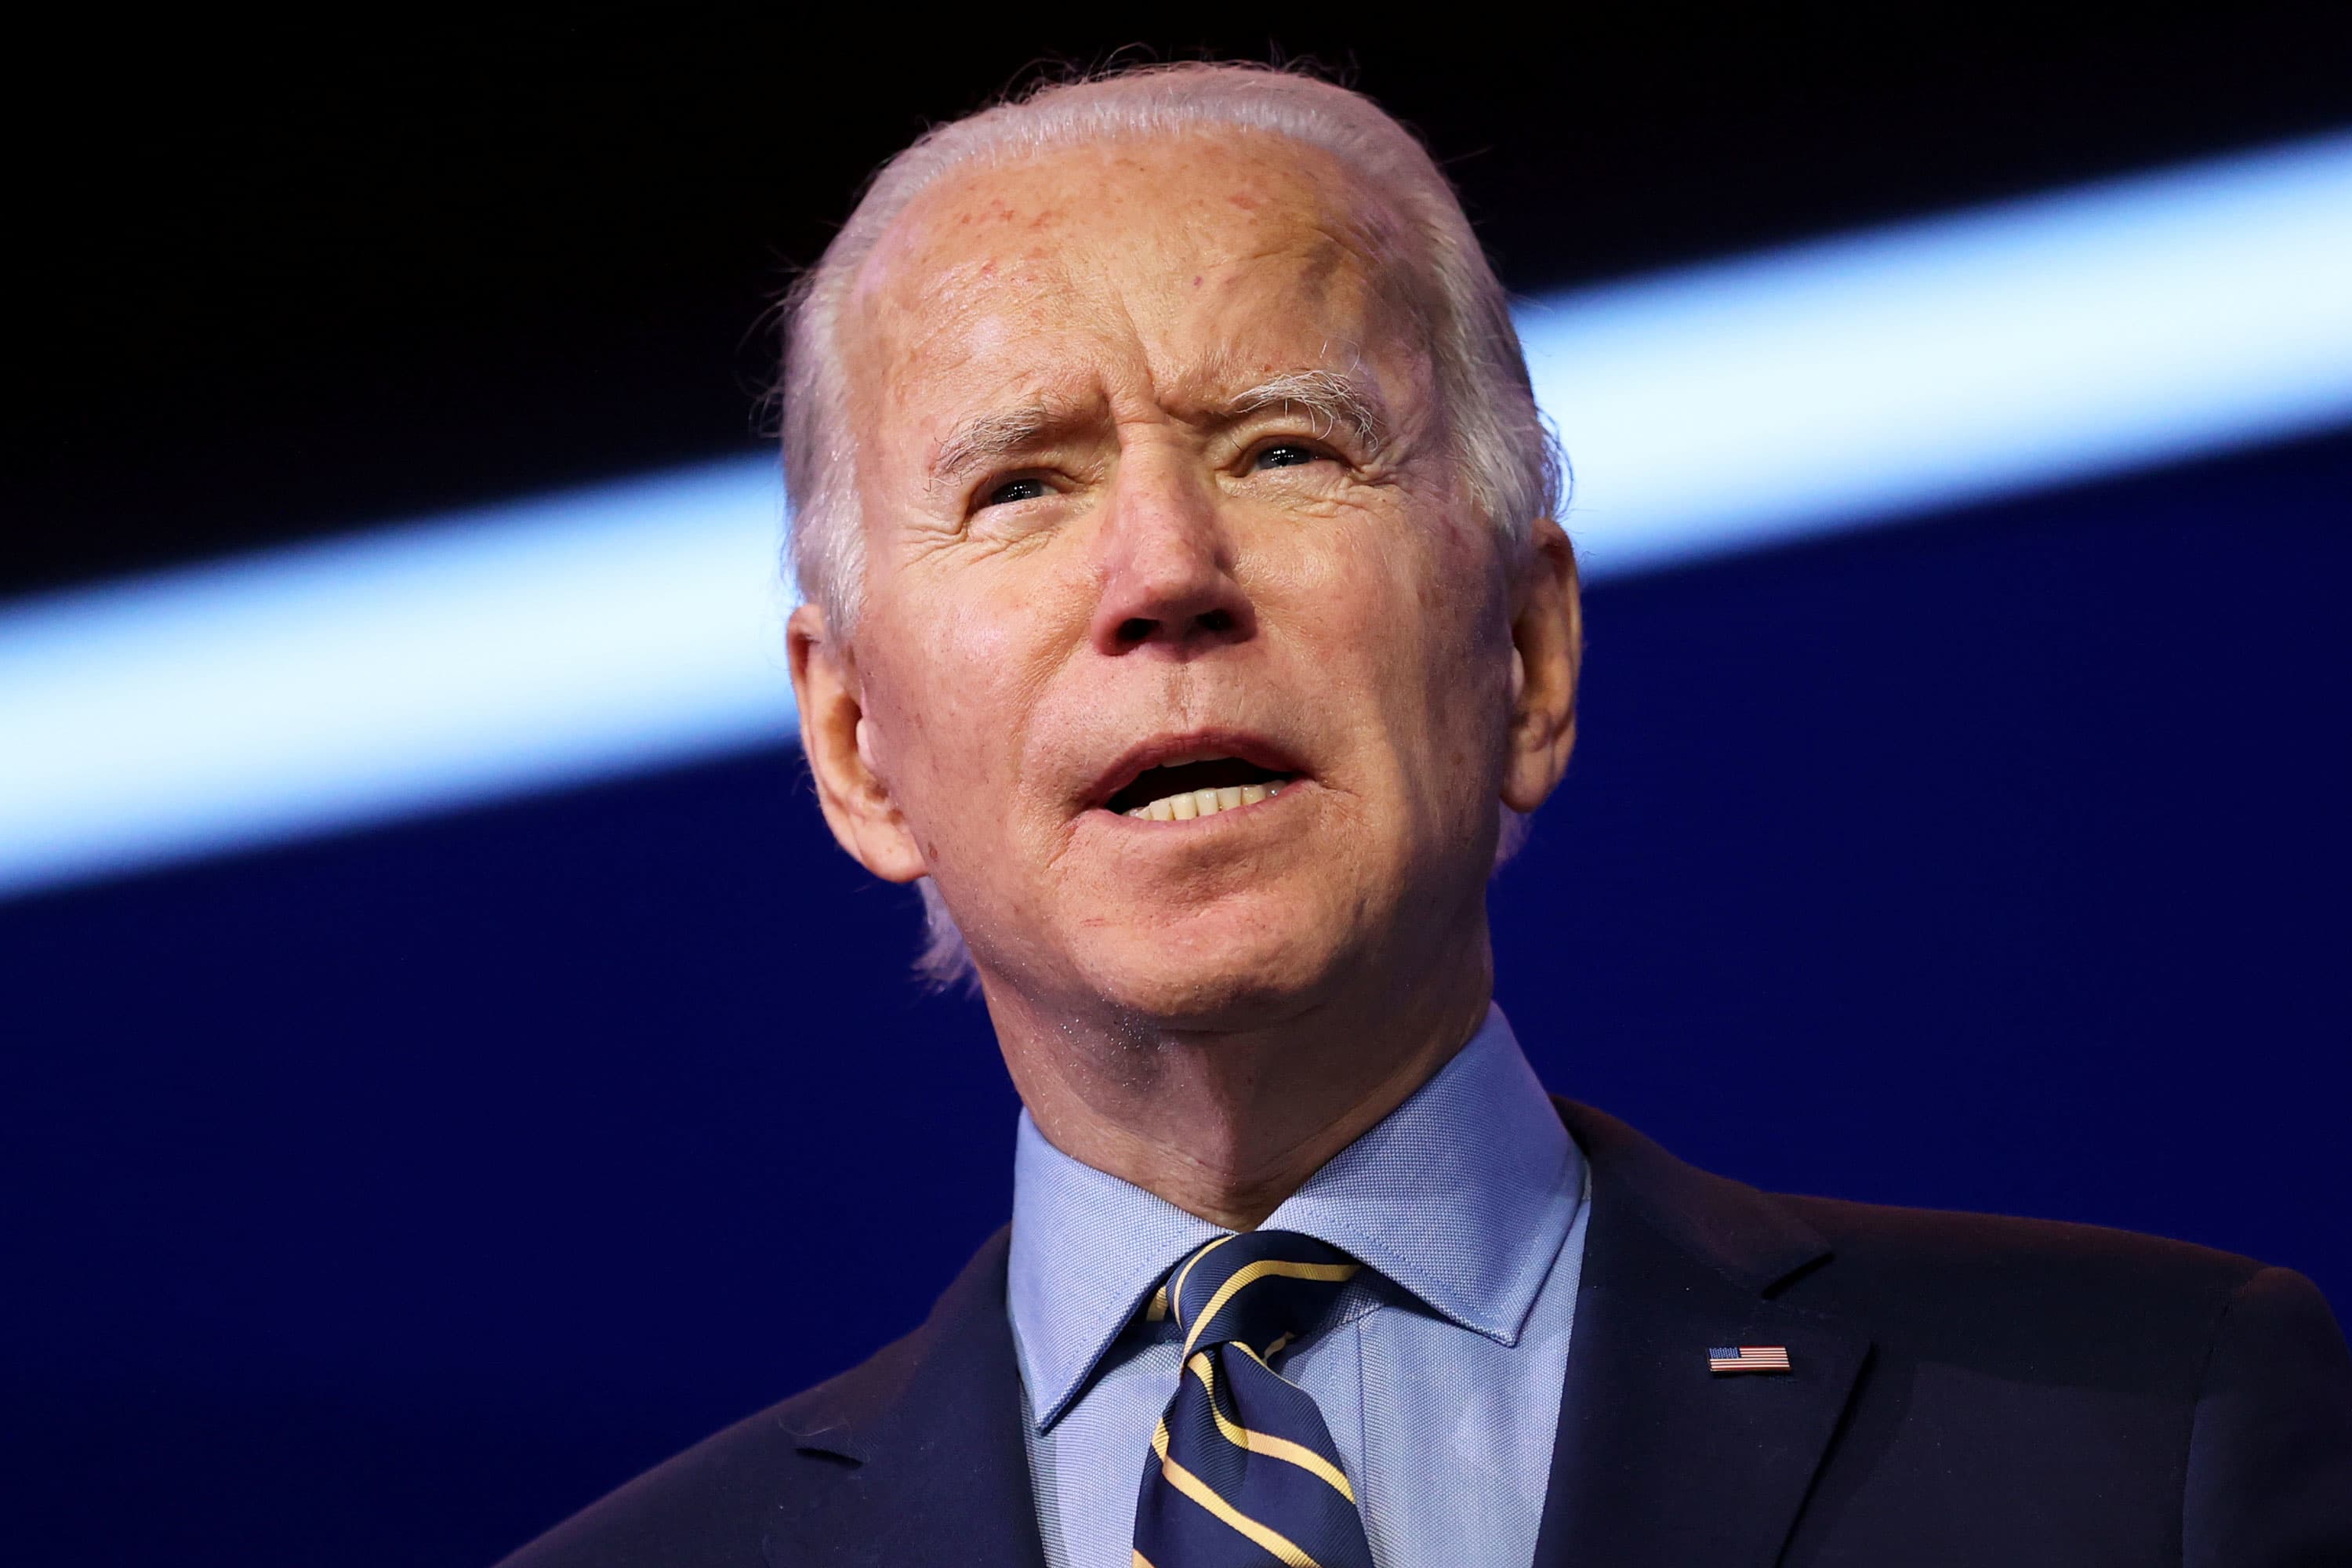 Biden unveils a comprehensive plan to combat the Covid pandemic in the United States